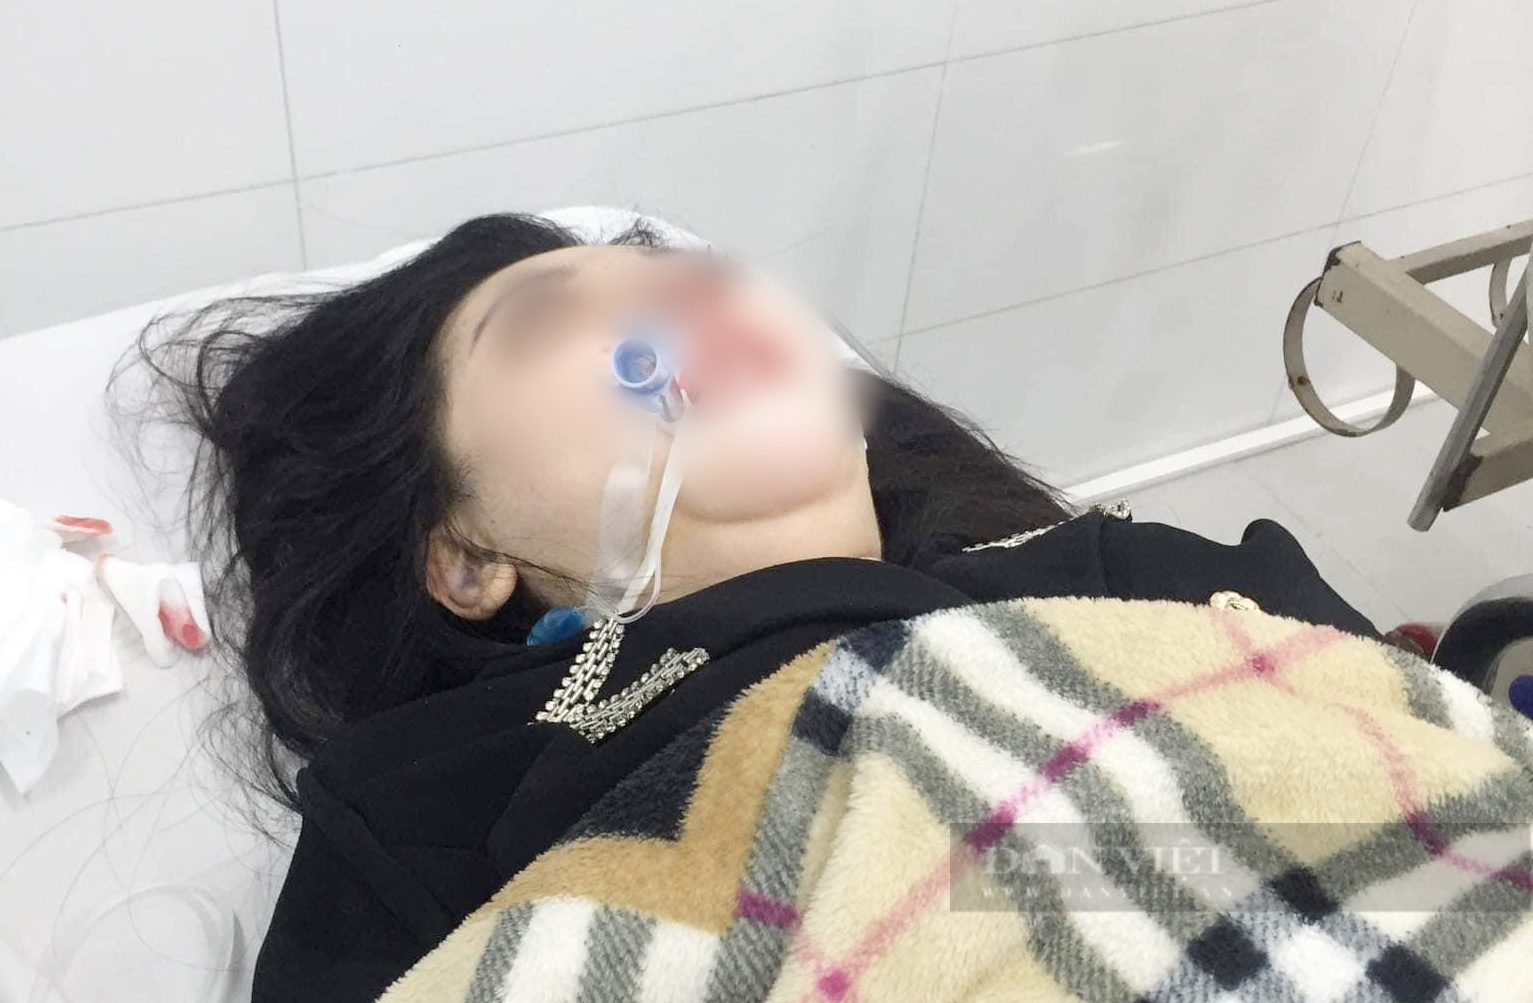 Rhinoplasty in cosmetic facility, 22 year old girl dies after 2 months in coma - 1